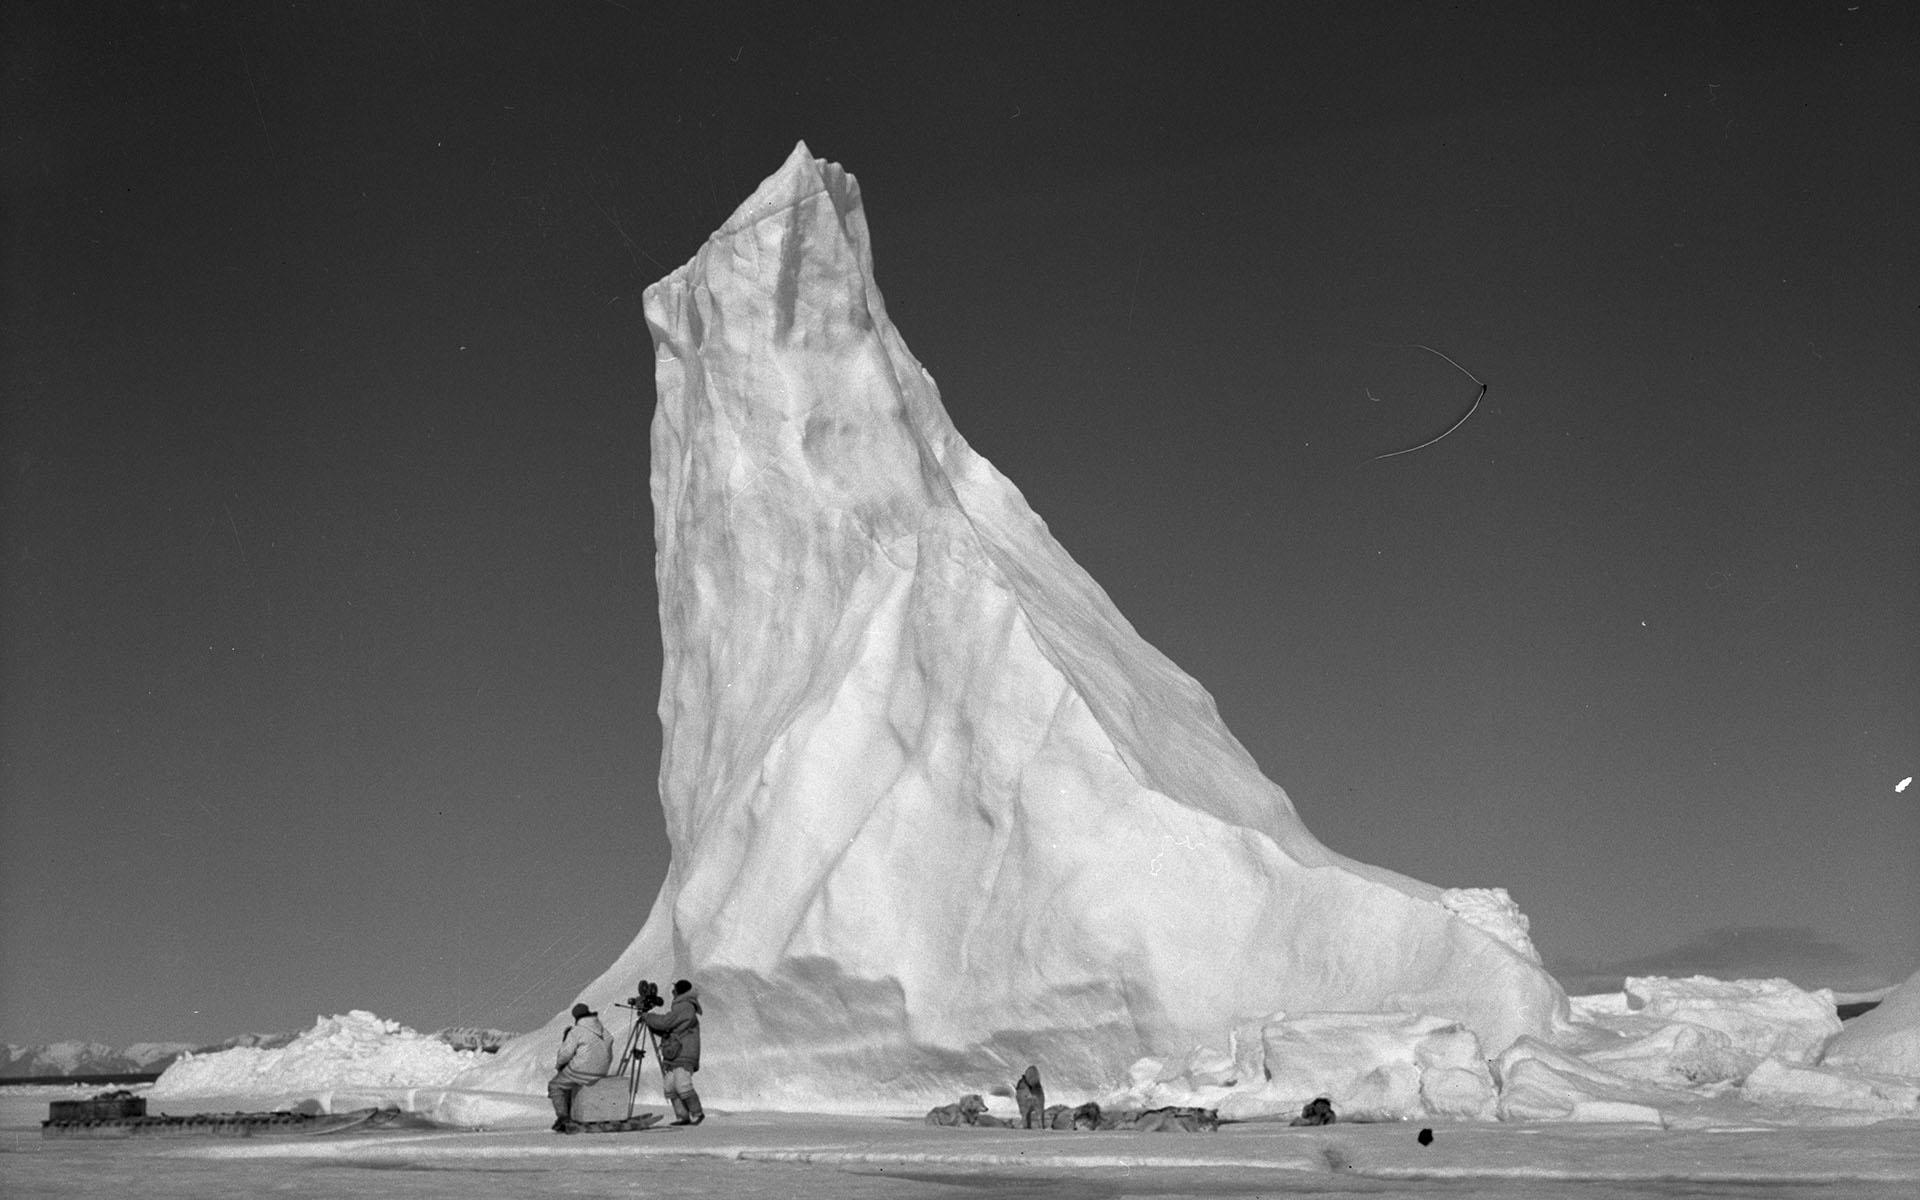 National Film Board crew setting up their camera near a towering arctic iceberg